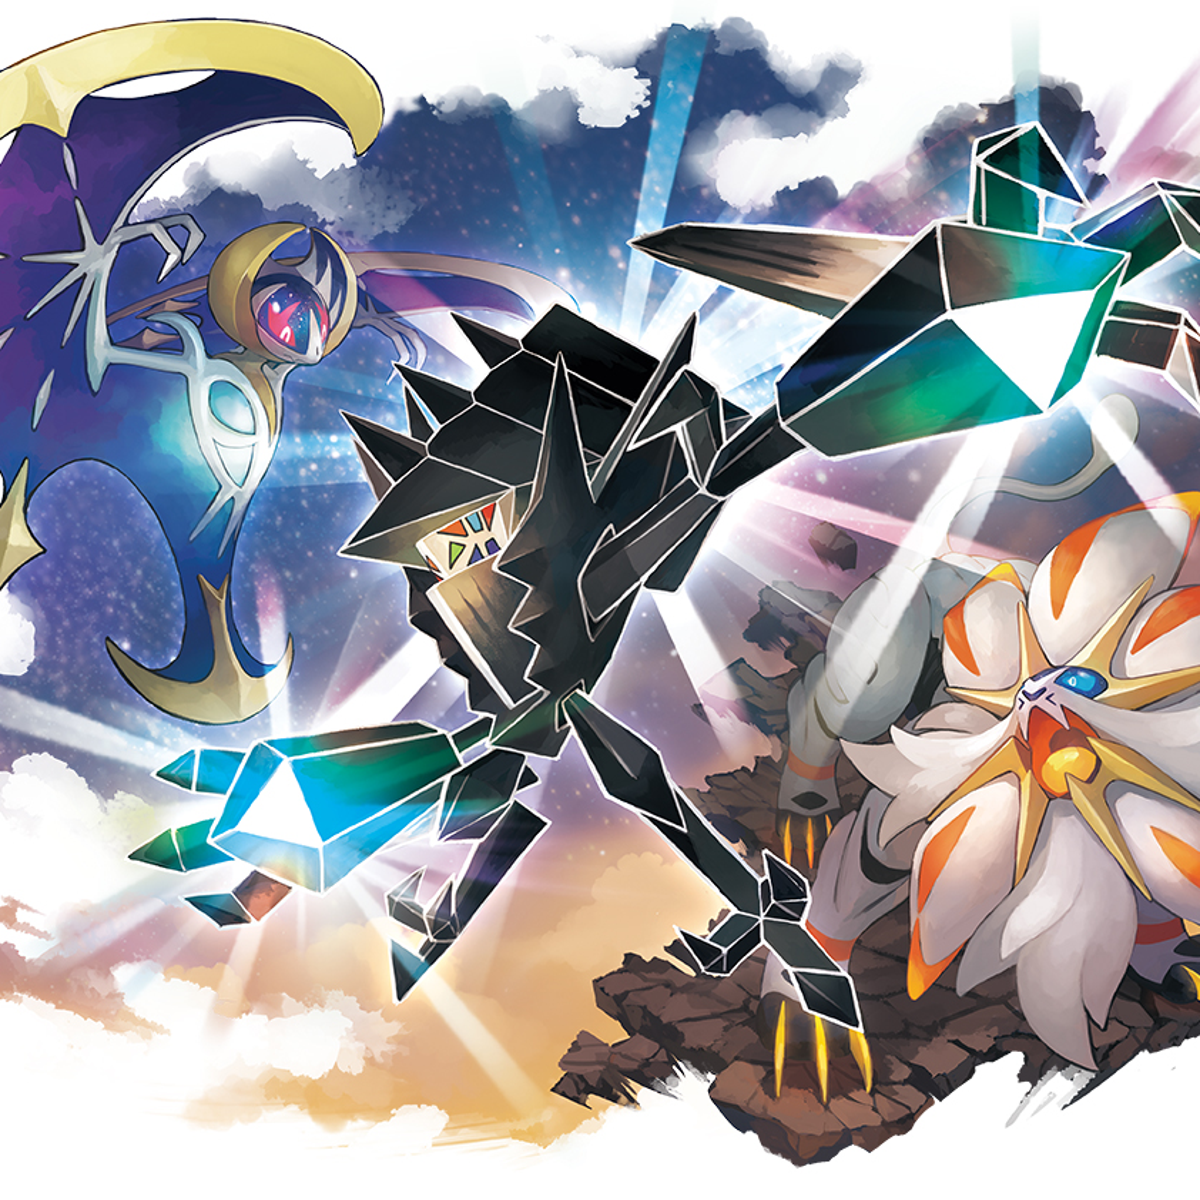 Pokemon Ultra Sun and Moon reviews round up - get all the scores here